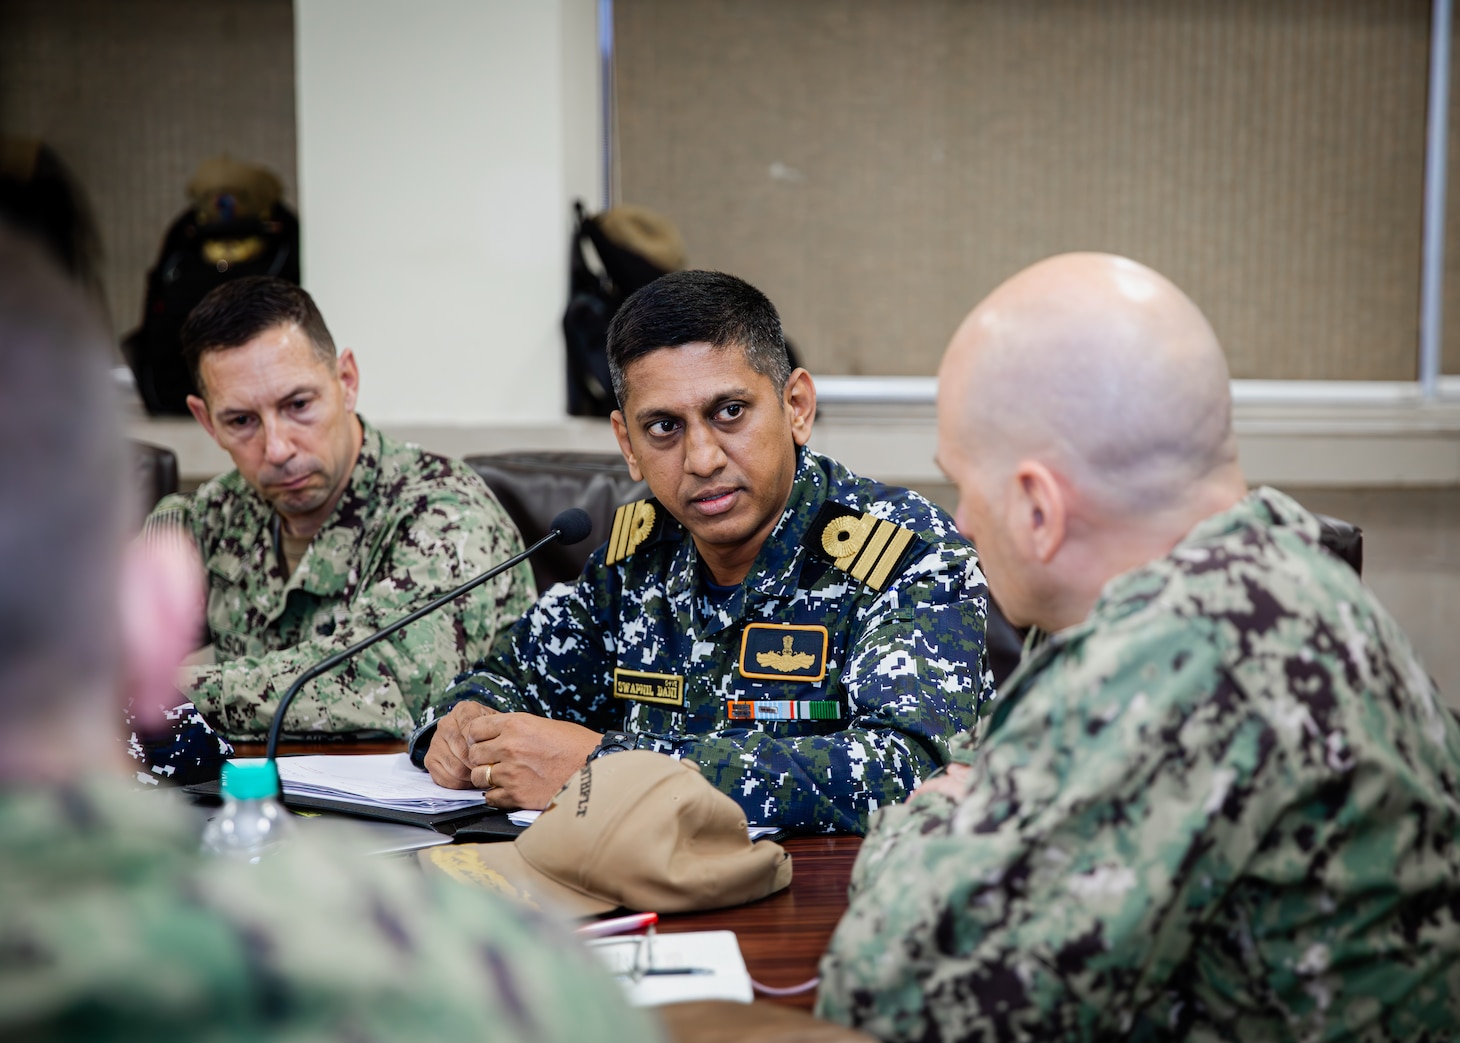 U.S. Navy Rear Adm. Joaquin Martinez, commander of the U.S. Joint Force for Tiger TRIUMPH, and Indian Navy representatives speak at a commander’s update brief in Visakhapatnam, India, March 20 during Exercise Tiger TRIUMPH 2024. Tiger TRIUMPH is a U.S.-India tri-service amphibious exercise focused on humanitarian assistance and disaster relief readiness and interoperability. Tiger TRIUMPH enables U.S. and Indian Armed Forces to improve interoperability and bilateral, joint, and service readiness in the Indian Ocean region and beyond to better achieve mutual regional security objectives. (Oklahoma National Guard photo by Cpl. Danielle Rayon)